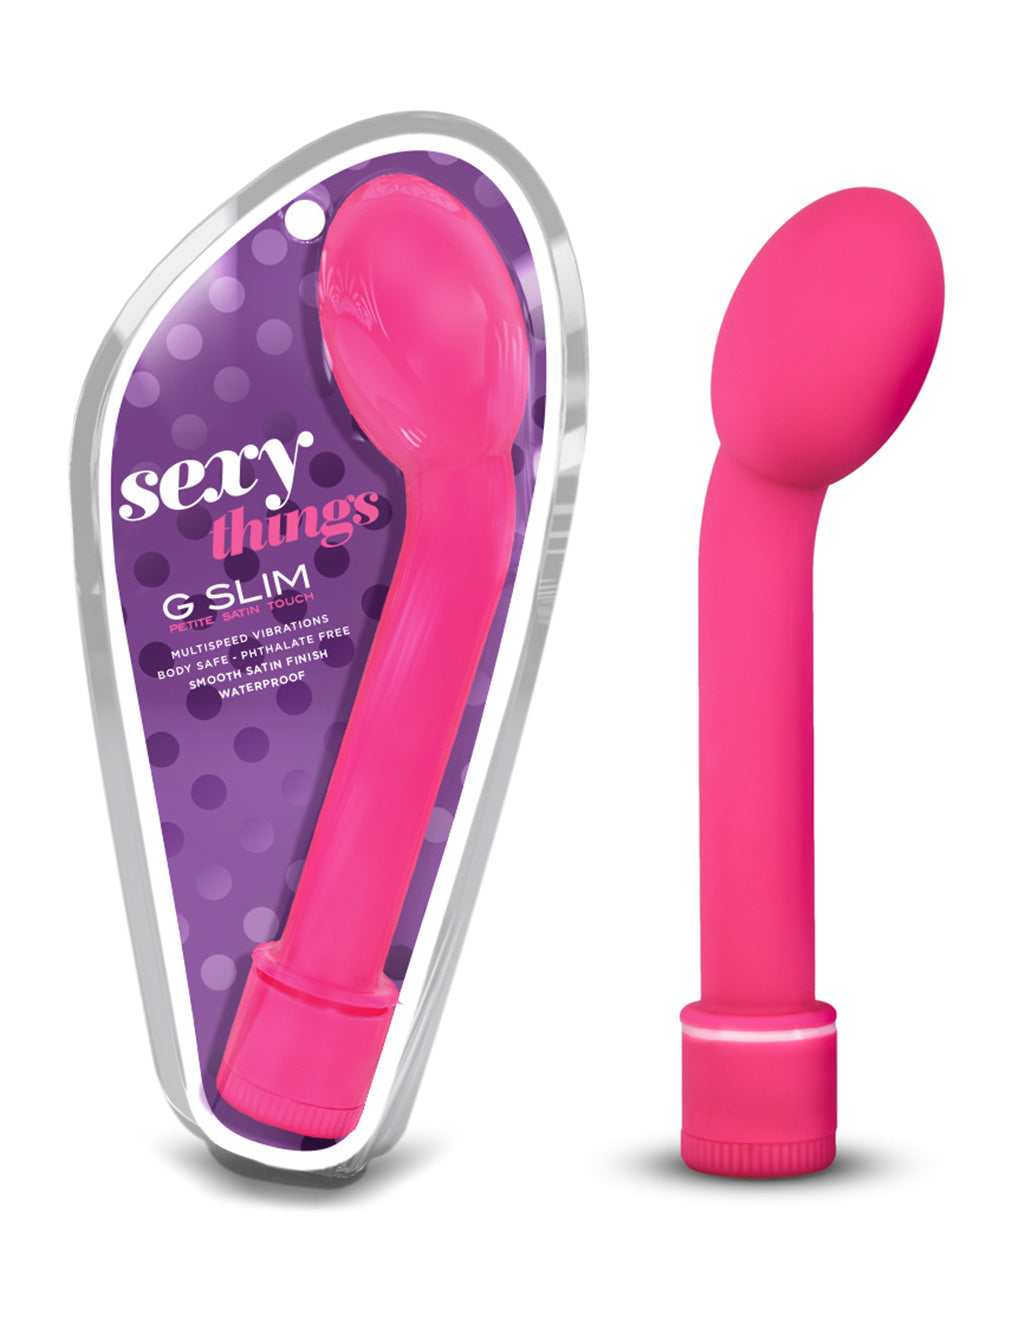 Sexy Things G Slim Petite G-spot Vibrator- Pink- Package